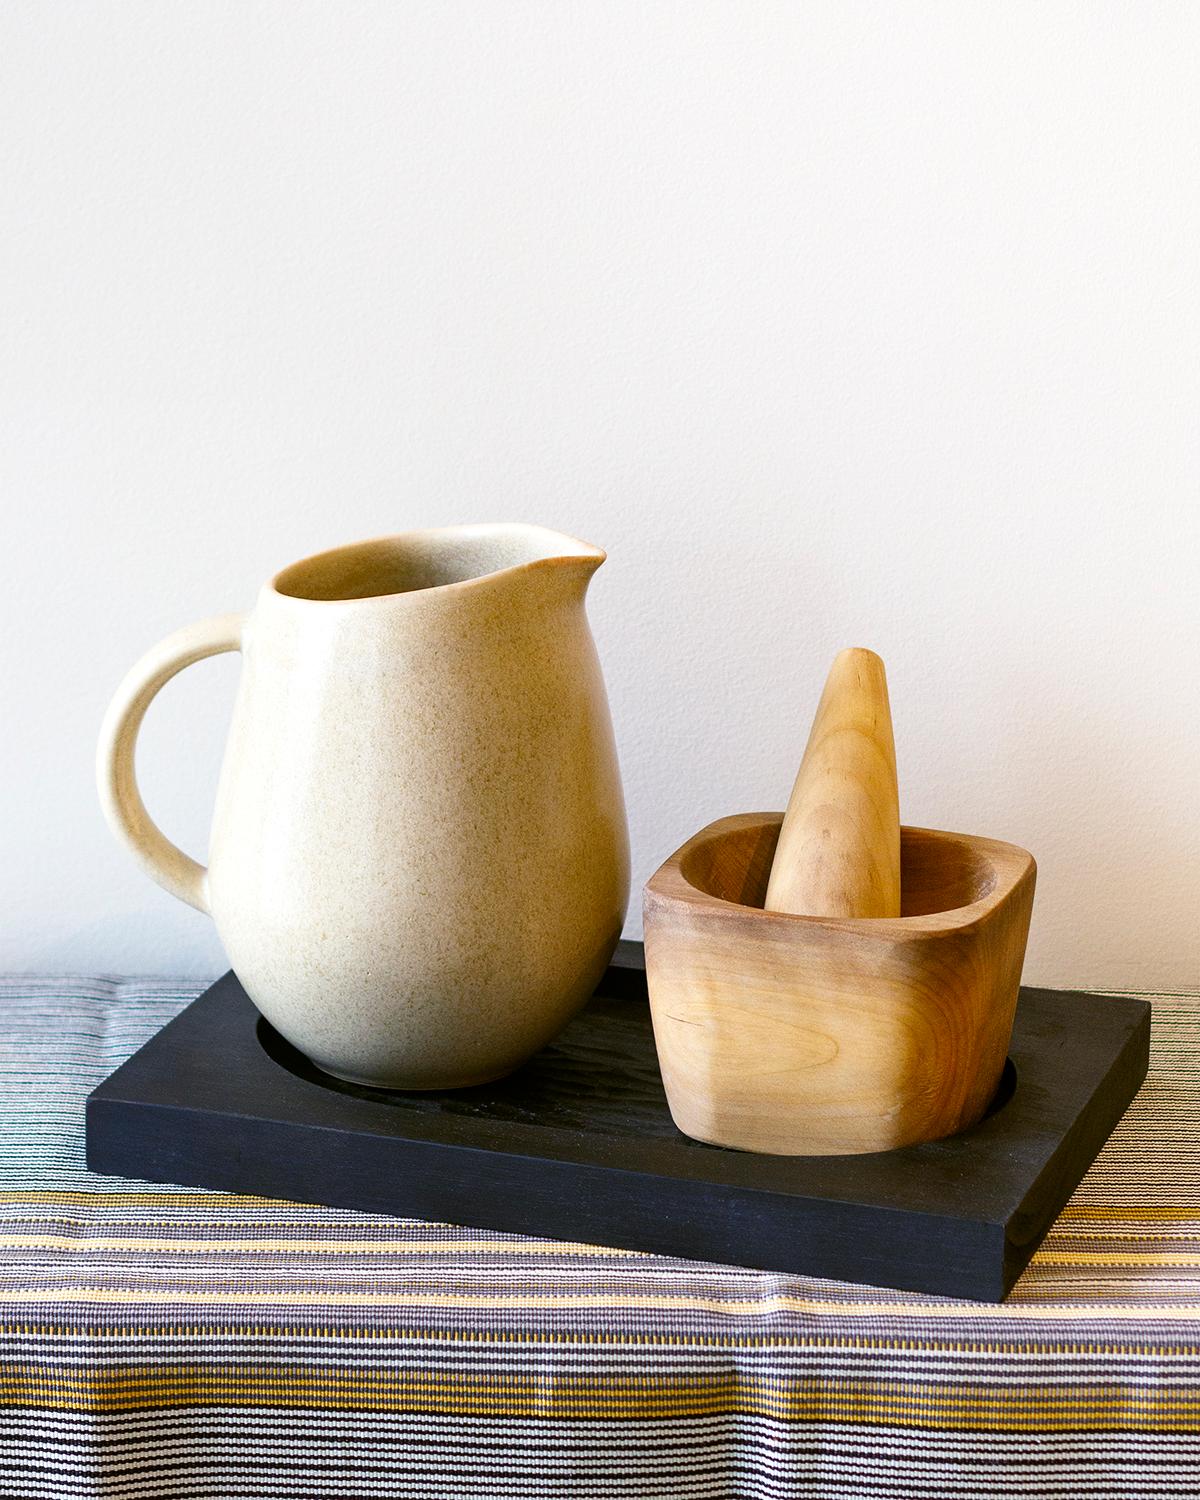 A stoneware pitcher to serve your favorite drinks. This handmade stoneware pitcher will bring the perfect touch of modern minimalism to your home. Its subtle cream and ivory glazes add organic texture and rustic charm to any decor. Great for serving